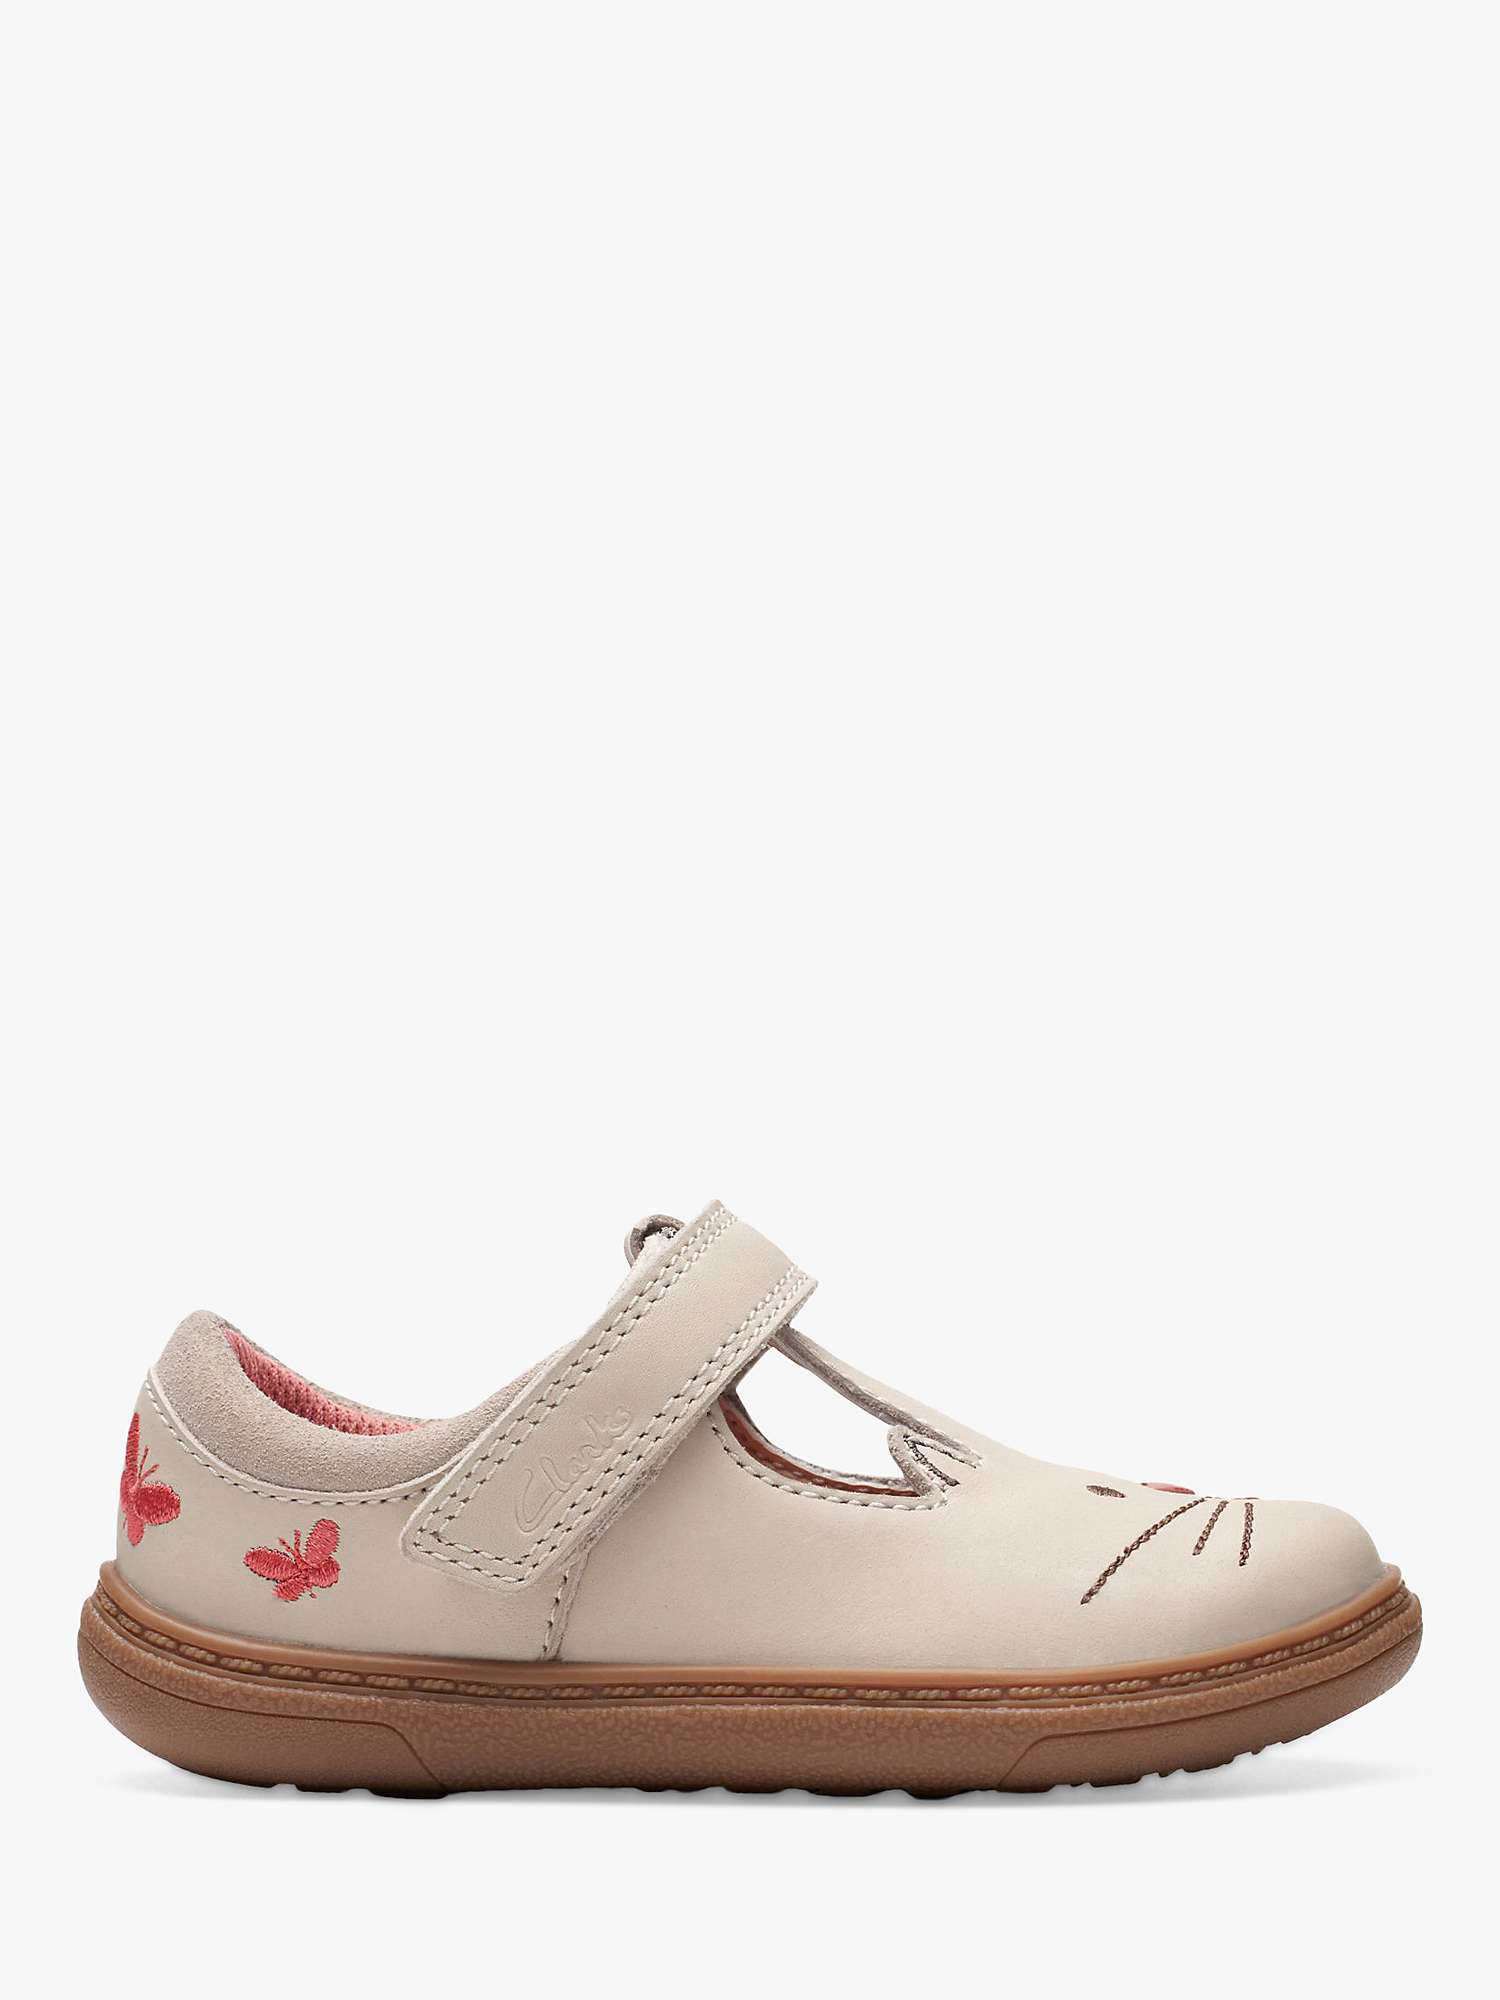 Buy Clarks Kids' Flash Ears Shoes, Off White Online at johnlewis.com